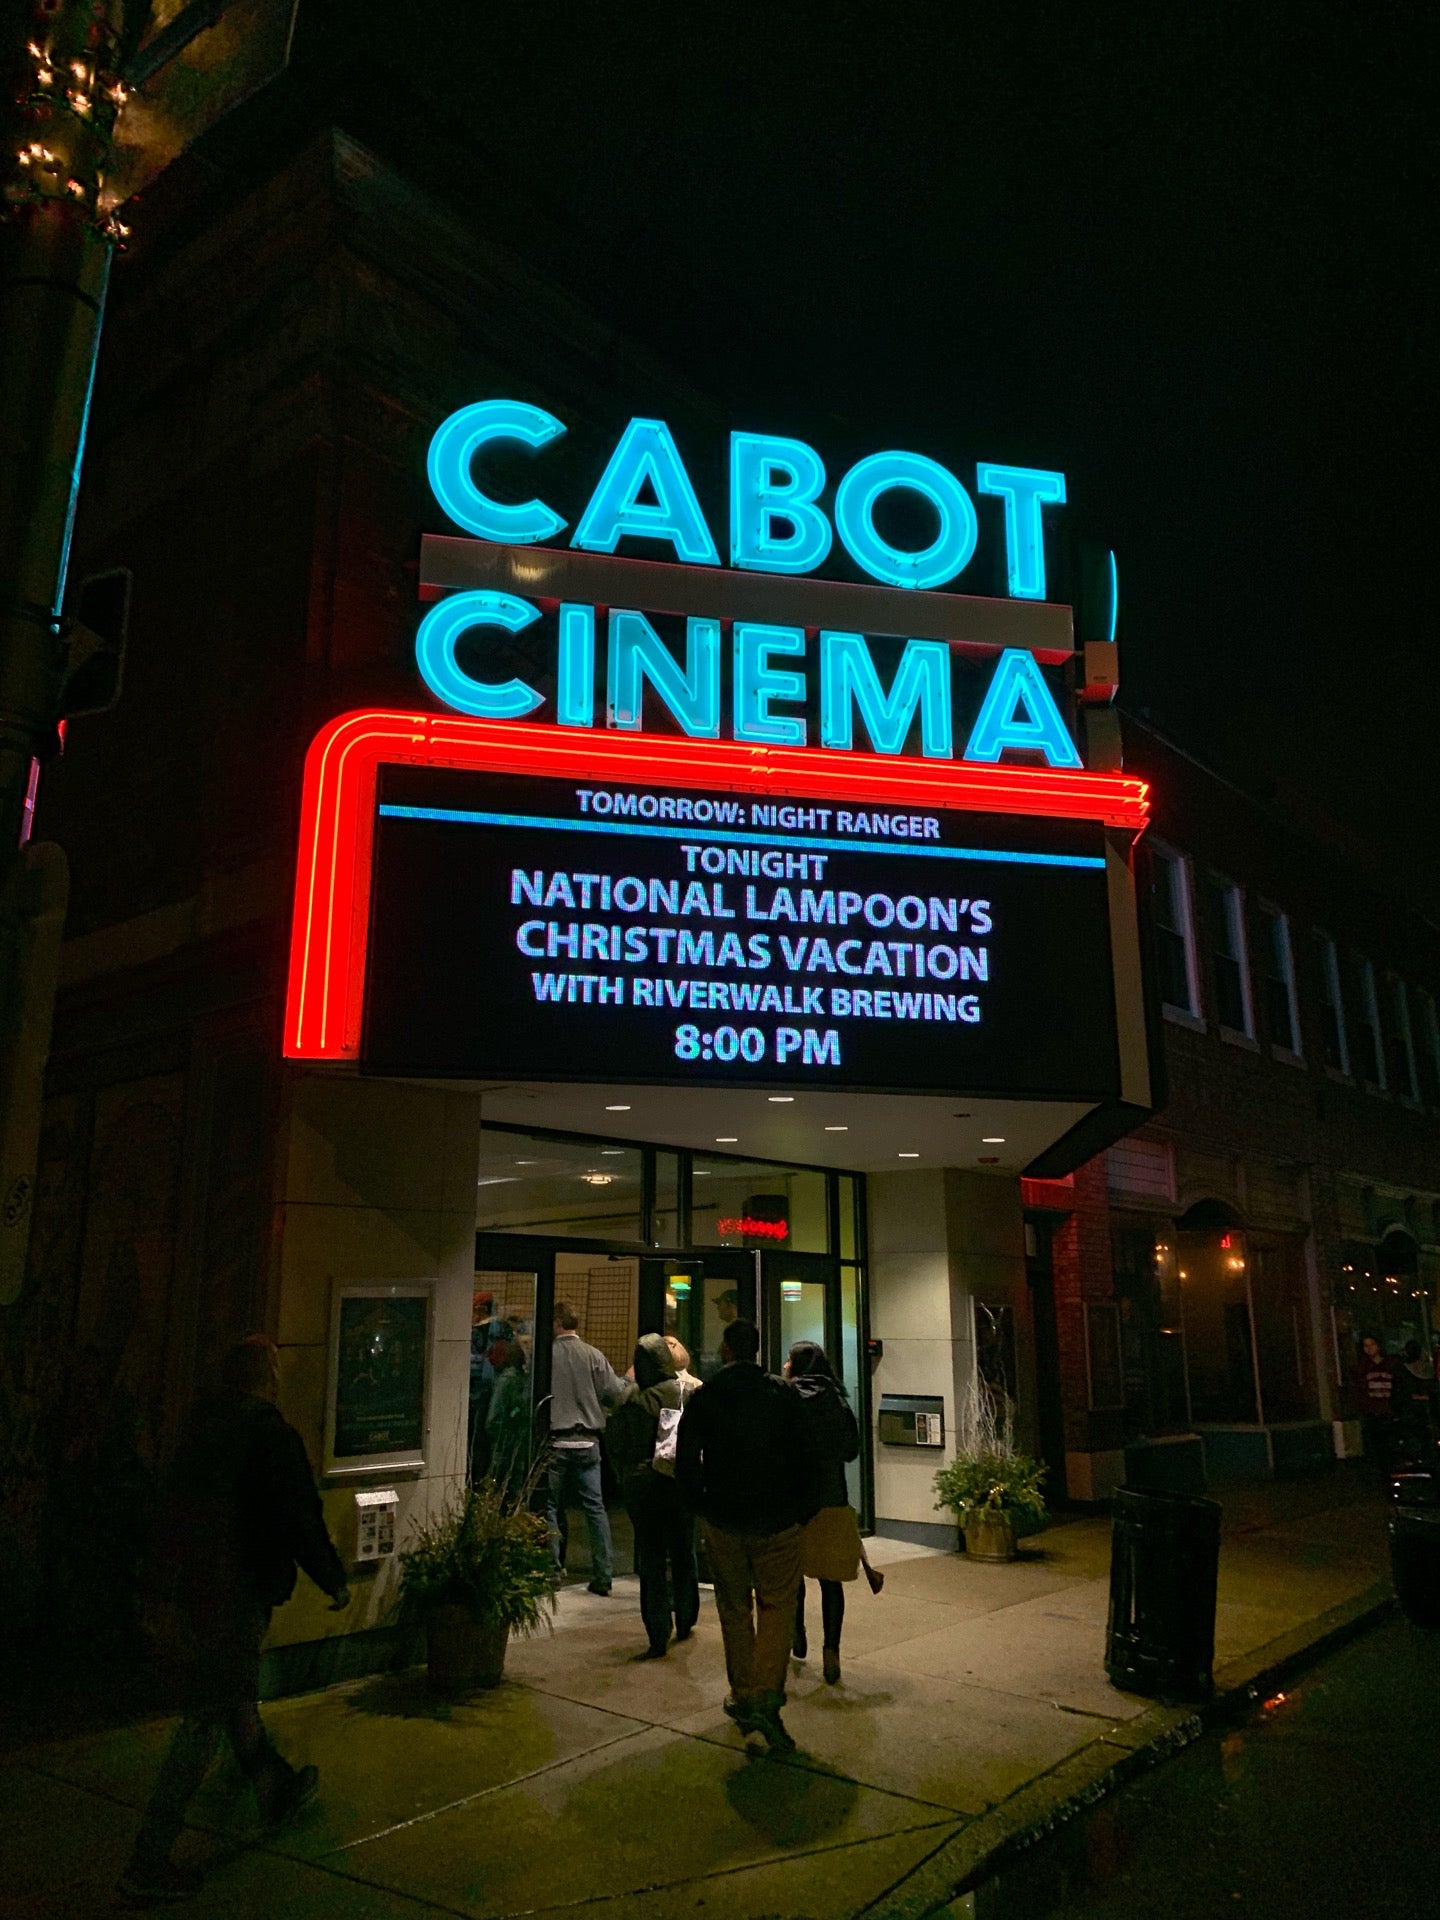 Cabot Street Cinema Theatre, 286 Cabot St, Beverly, MA, Motion picture